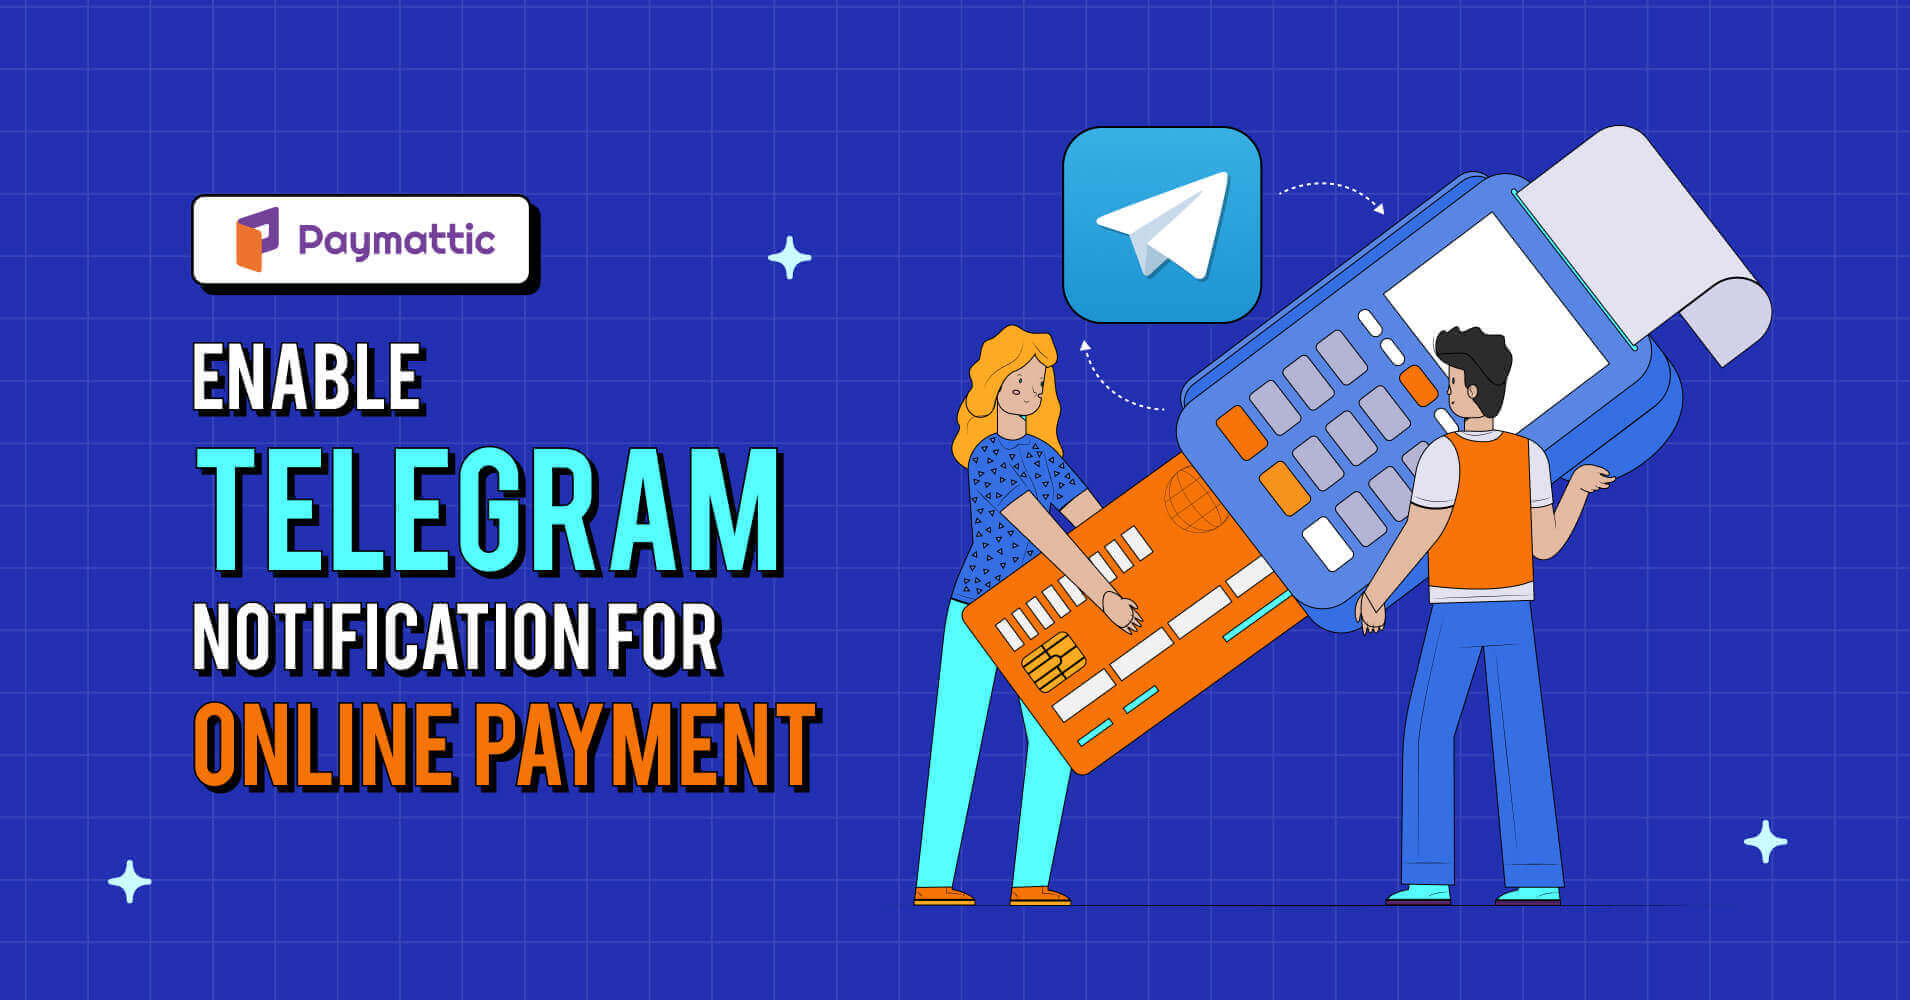 How to Enable Telegram Notifications for Online Payment